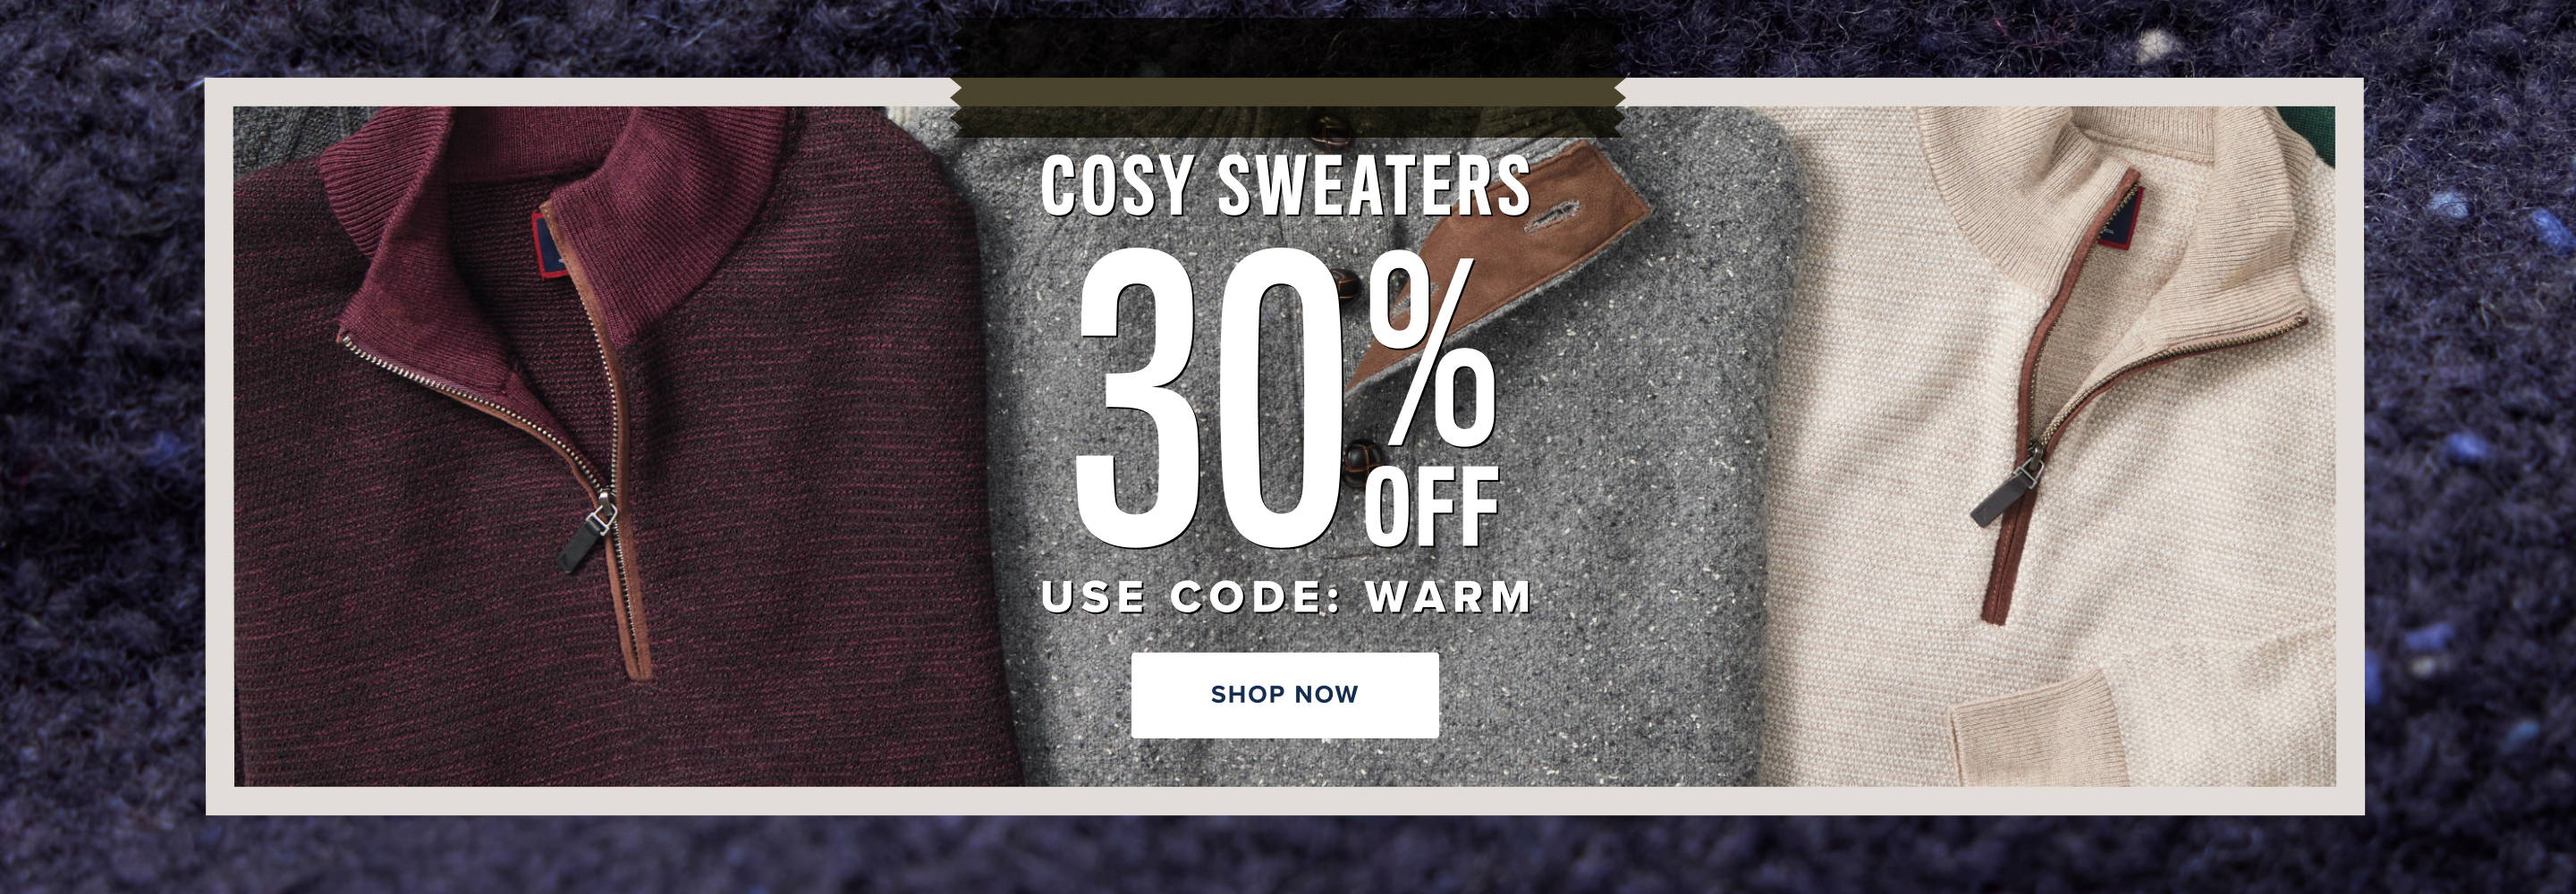 Cosy Sweaters 30% off. Use code WARM